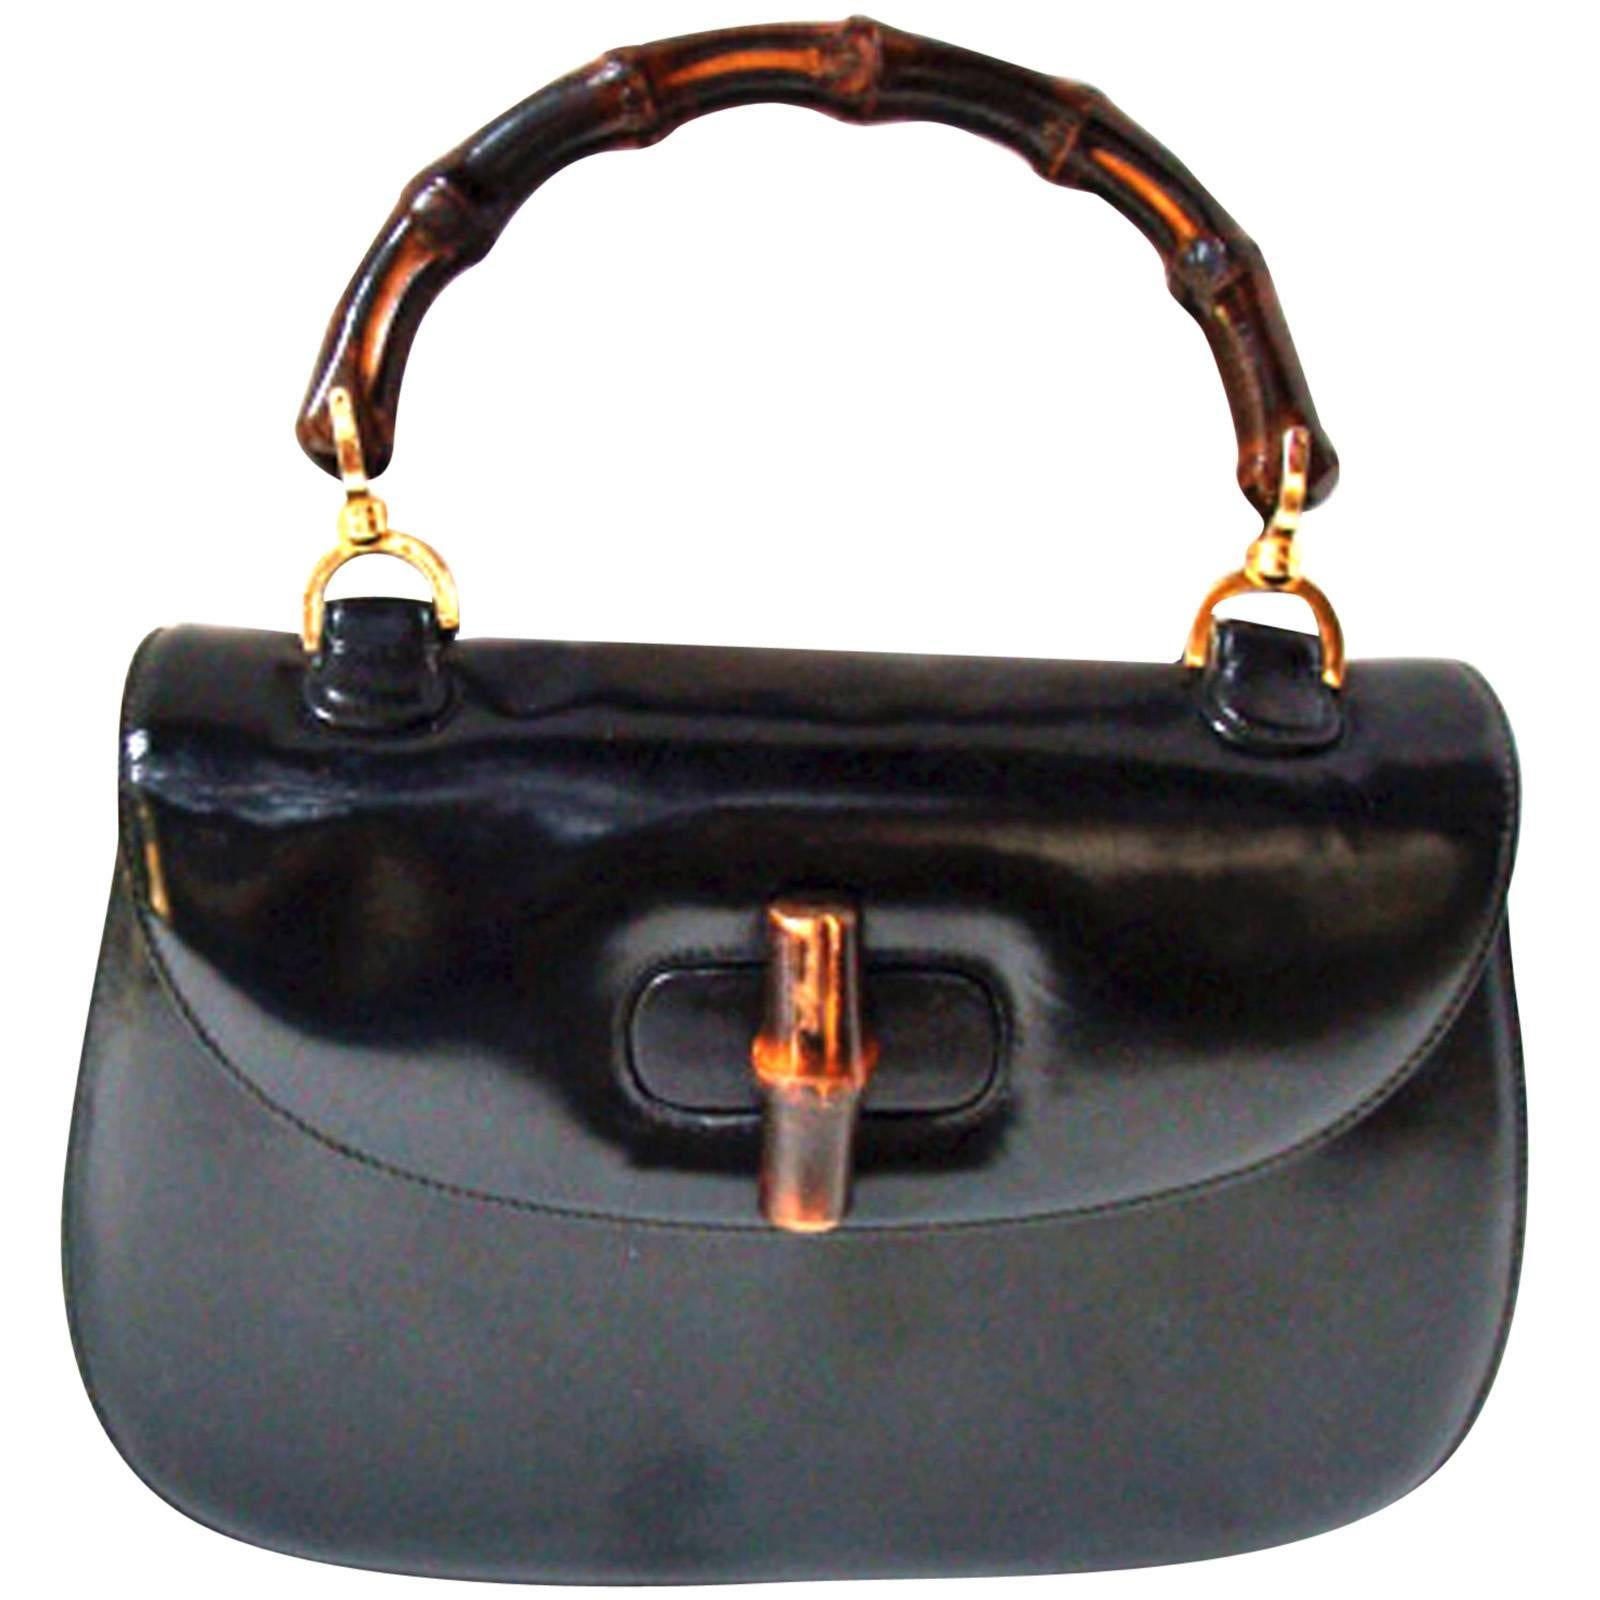 Classic Black Leather  Bamboo Handle Handbag by Gucci